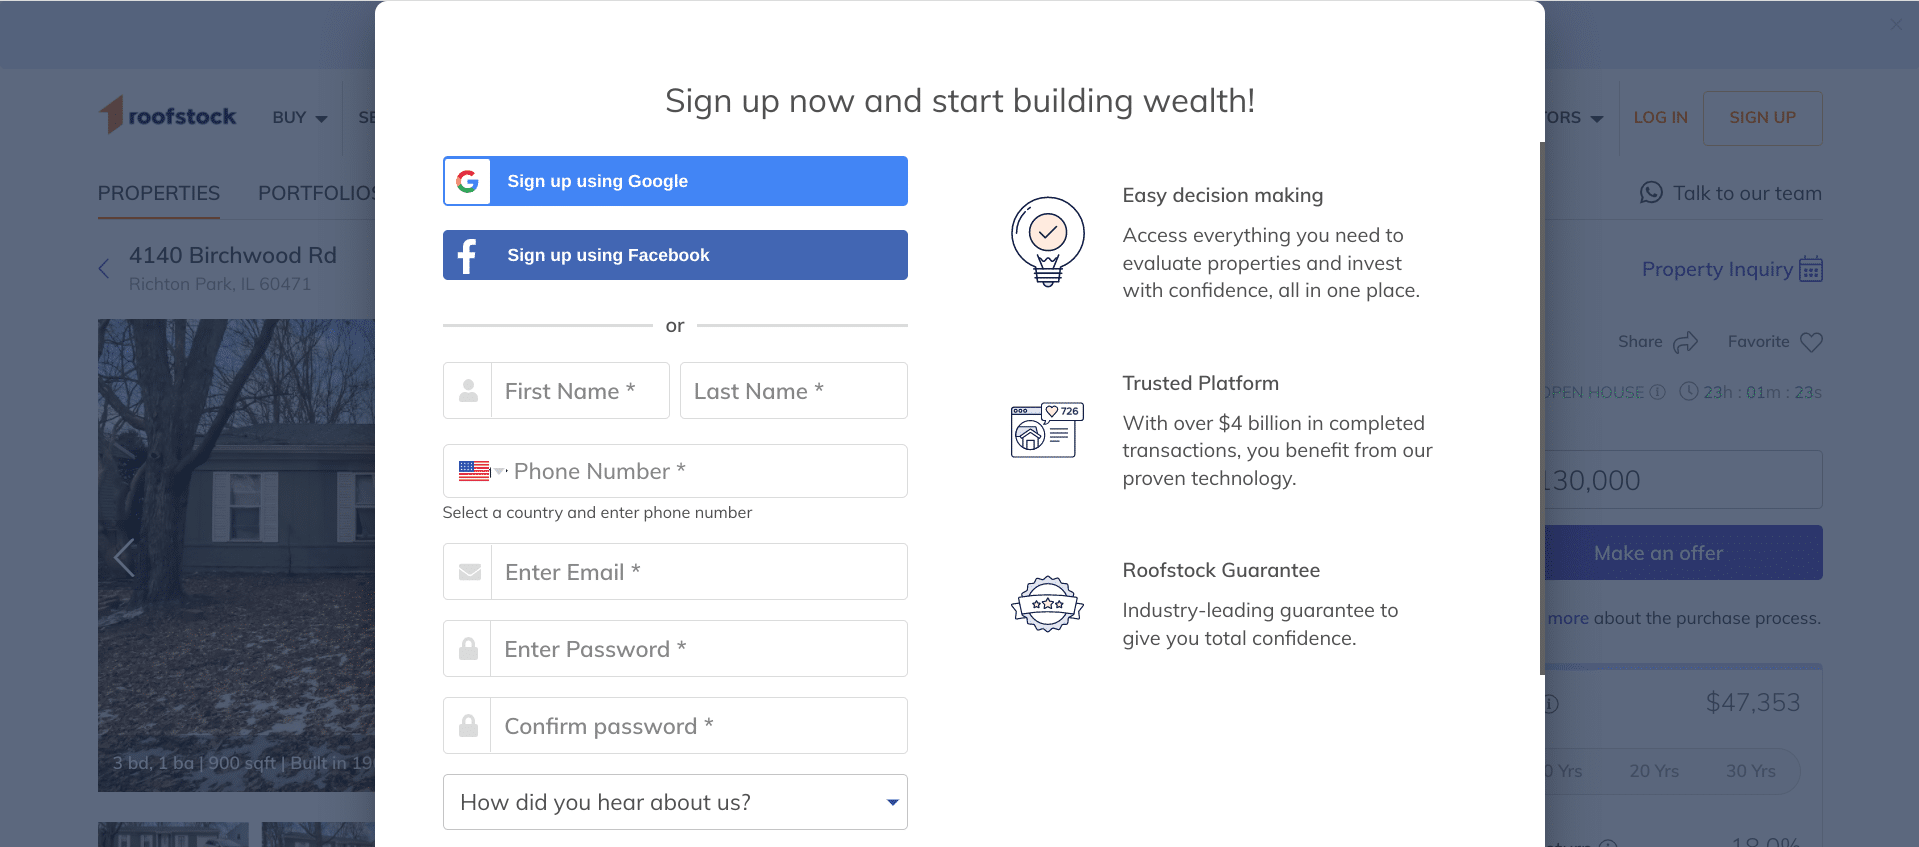 Screenshot of the Roofstock sign-up screen